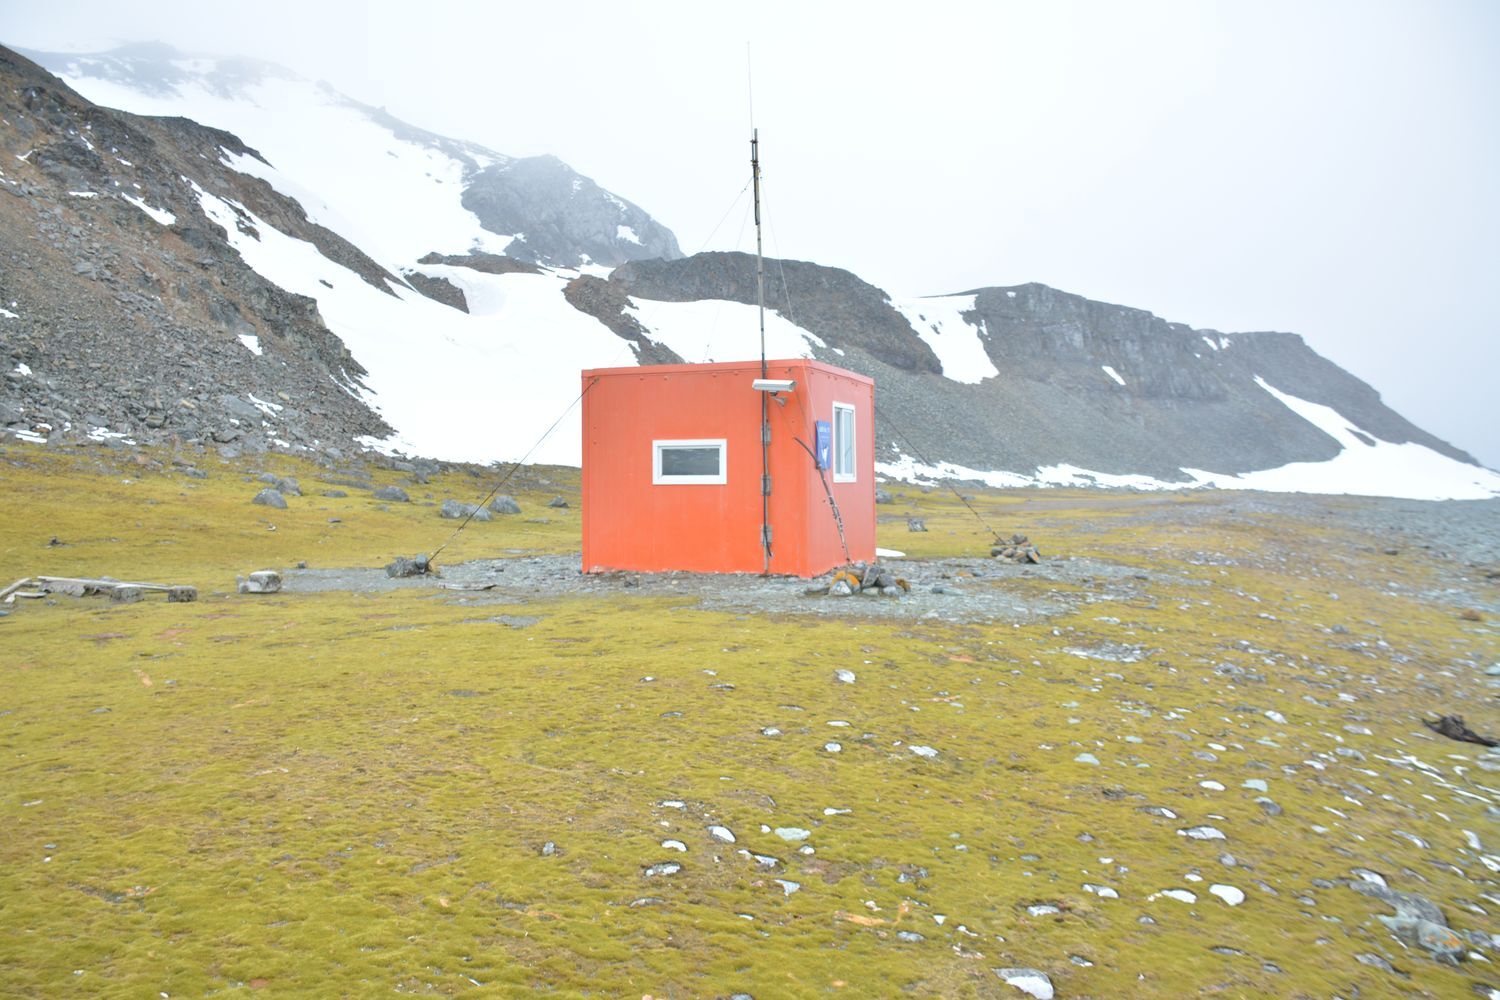 Photograph of a small, orange, cubic building in Antarctica.